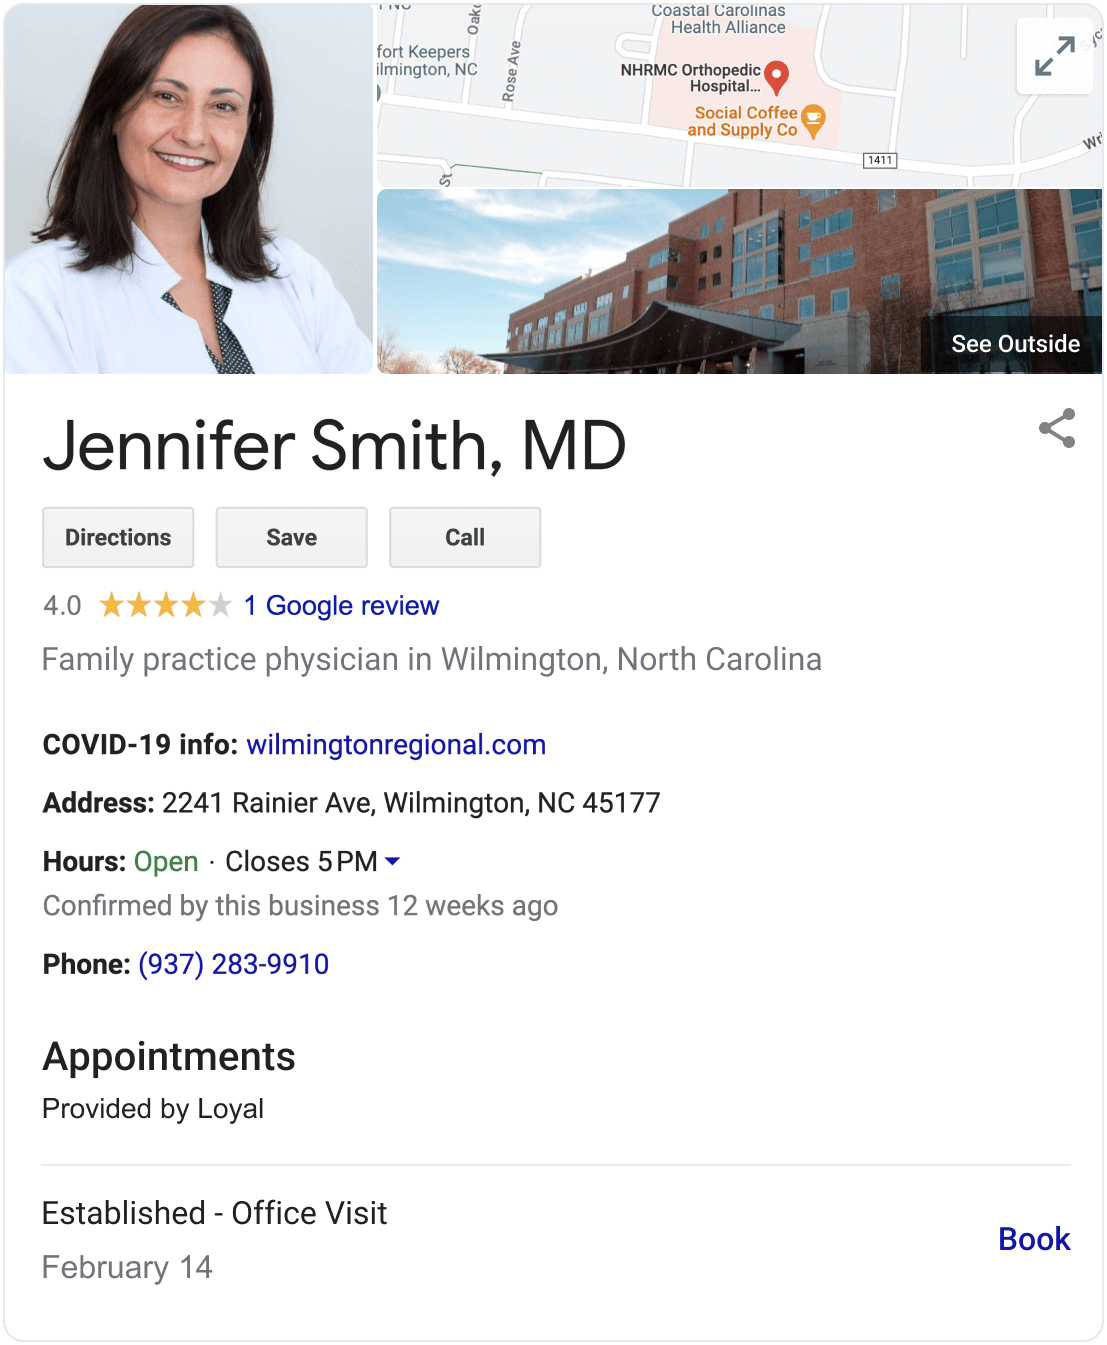 Google featured listing with Physician information and scheduling links